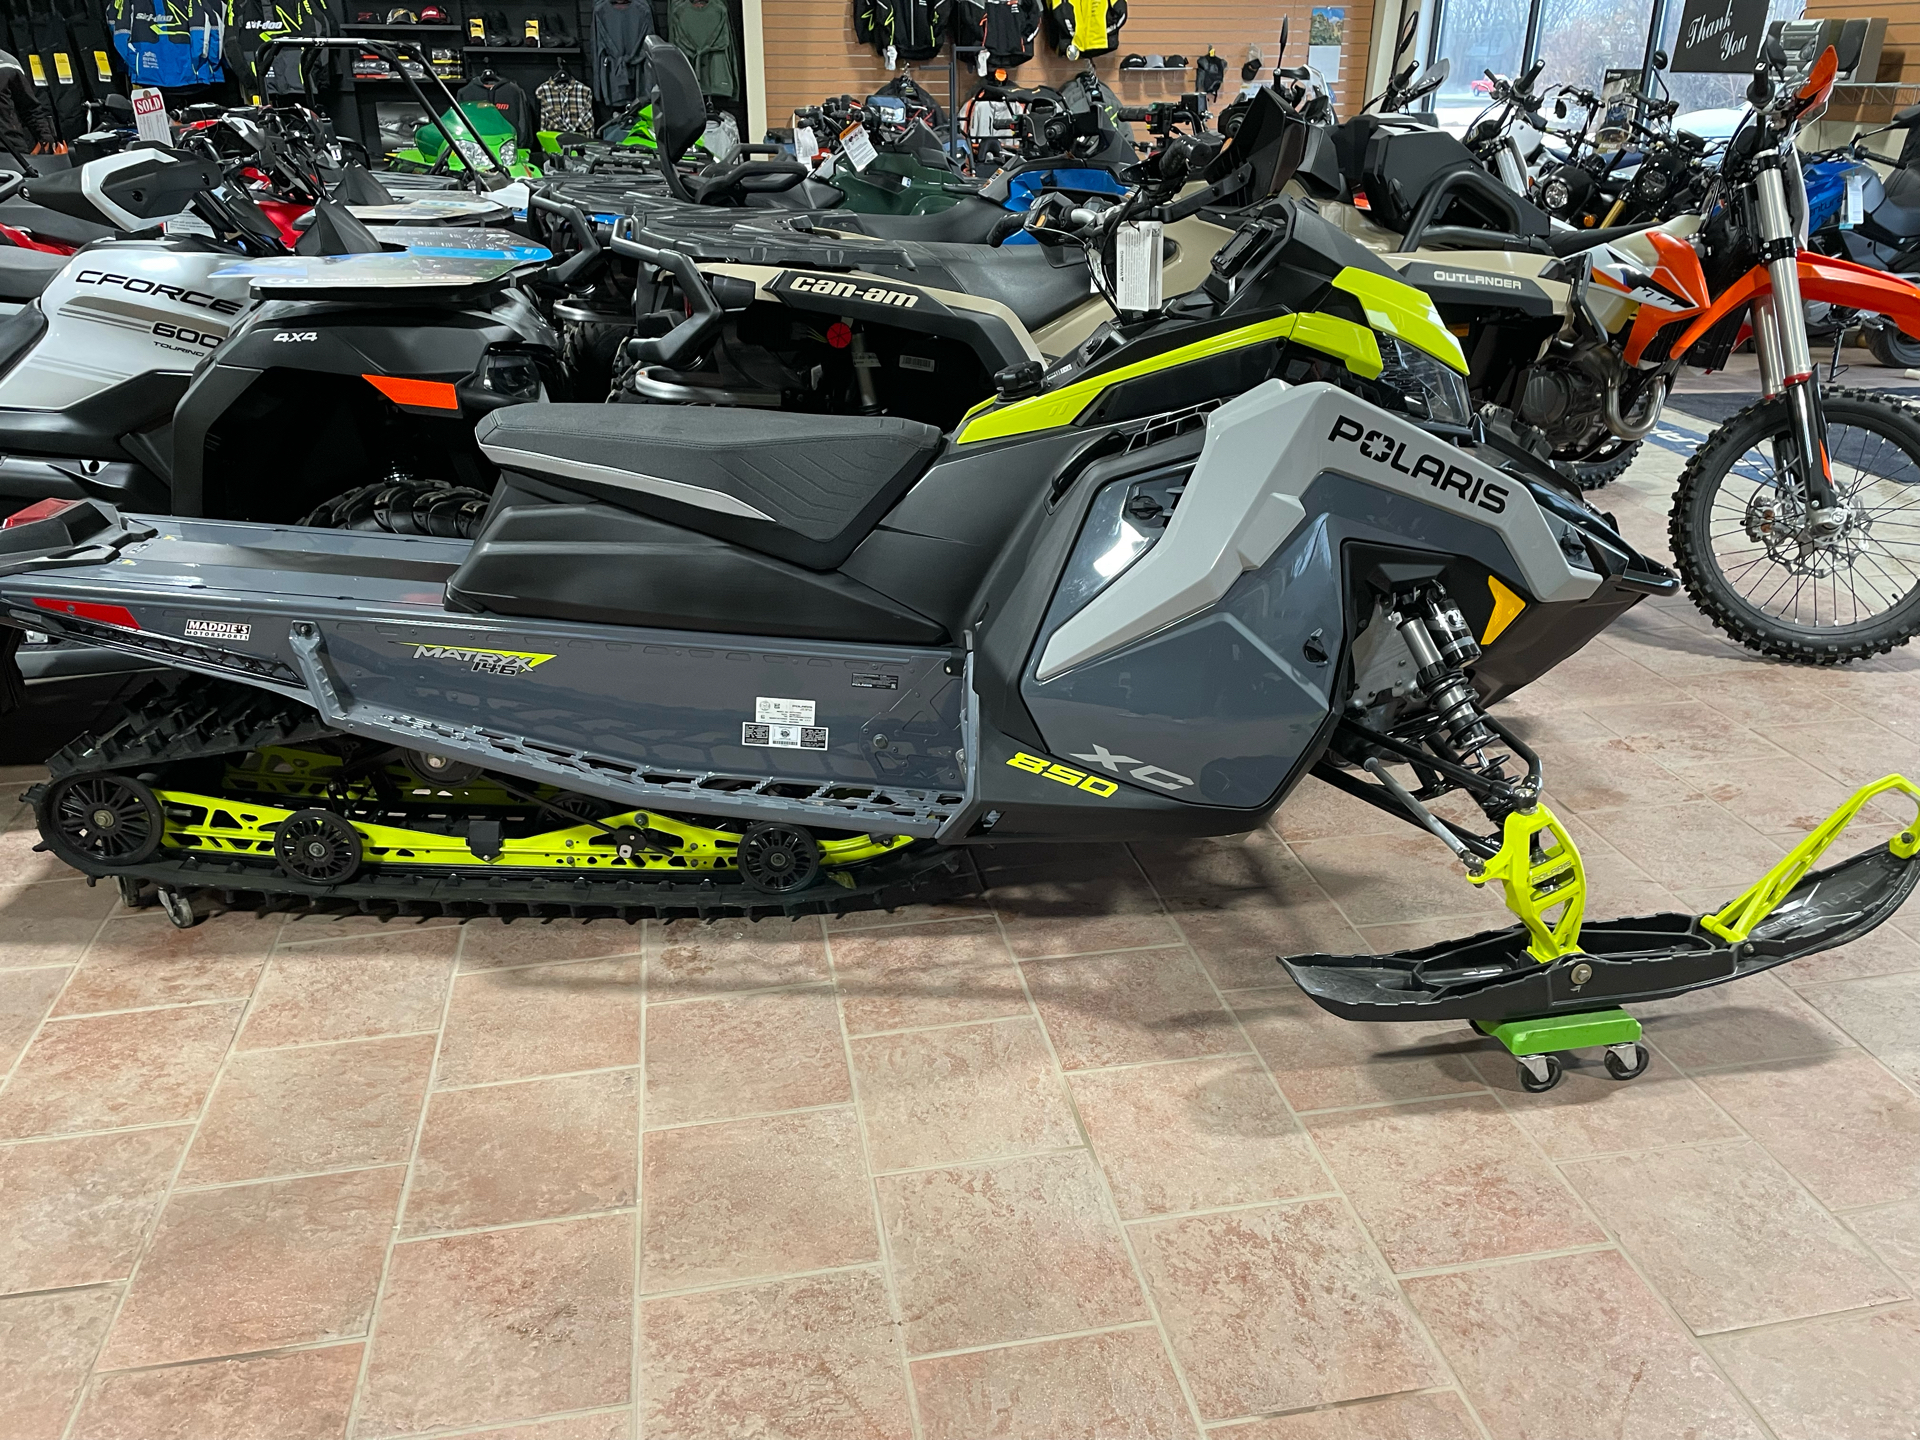 2022 Polaris 850 Switchback XC 146 Factory Choice in Spencerport, New York - Photo 2